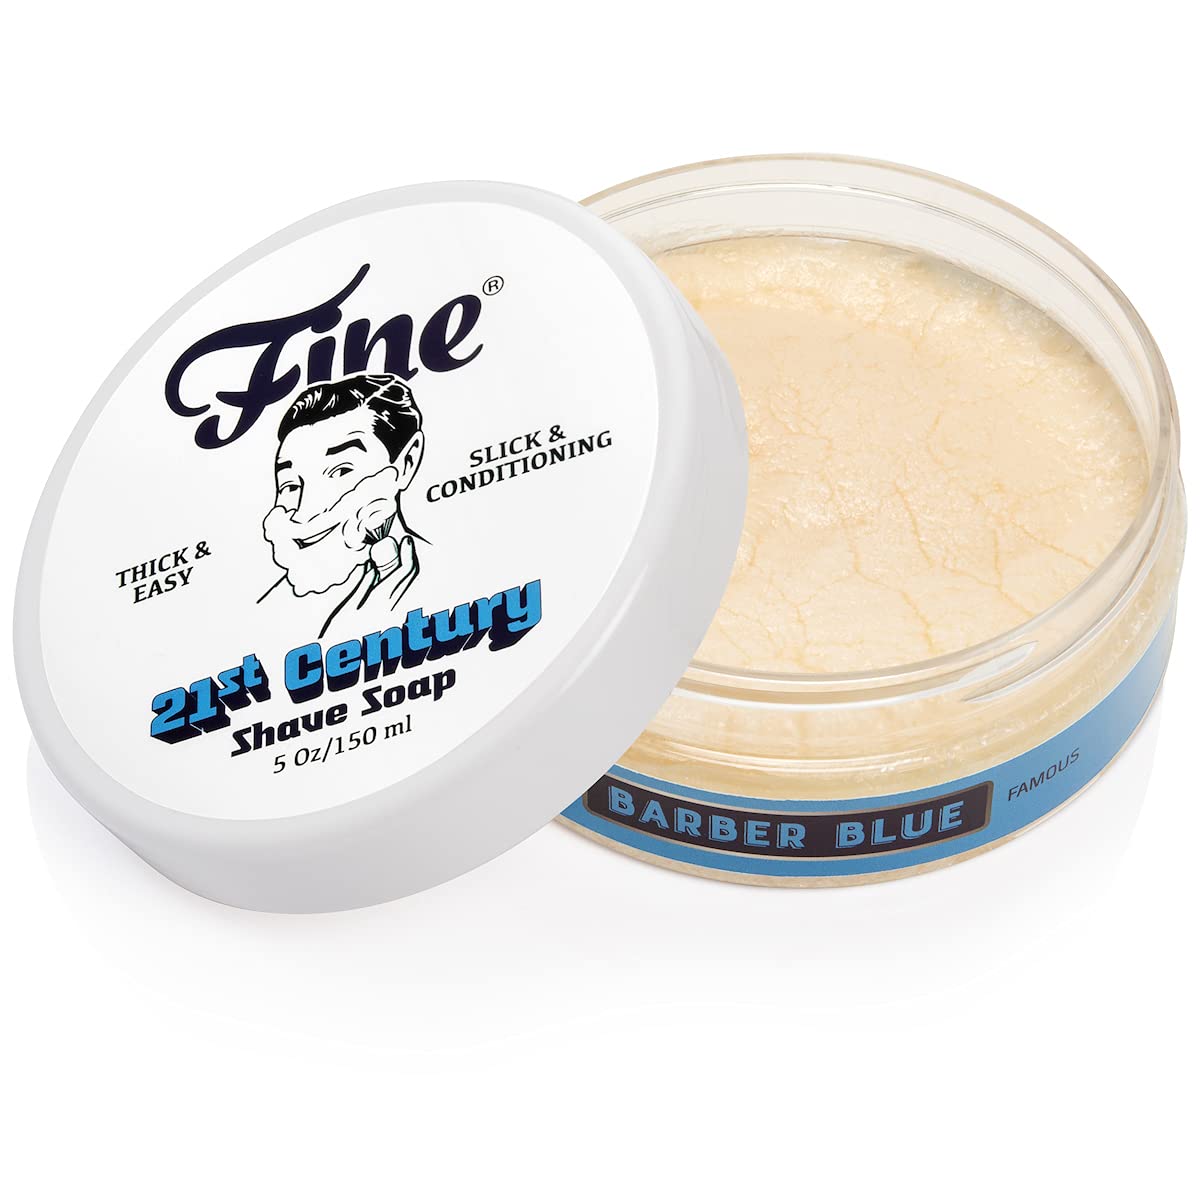 Mr. Fine 21C Men’s Shaving Soap, Builds Thick & Easy Lather, Protects From Razor Burn & Irritation, No Artificial Colors, Made In Italy, 5. (150ml), Barber Blue